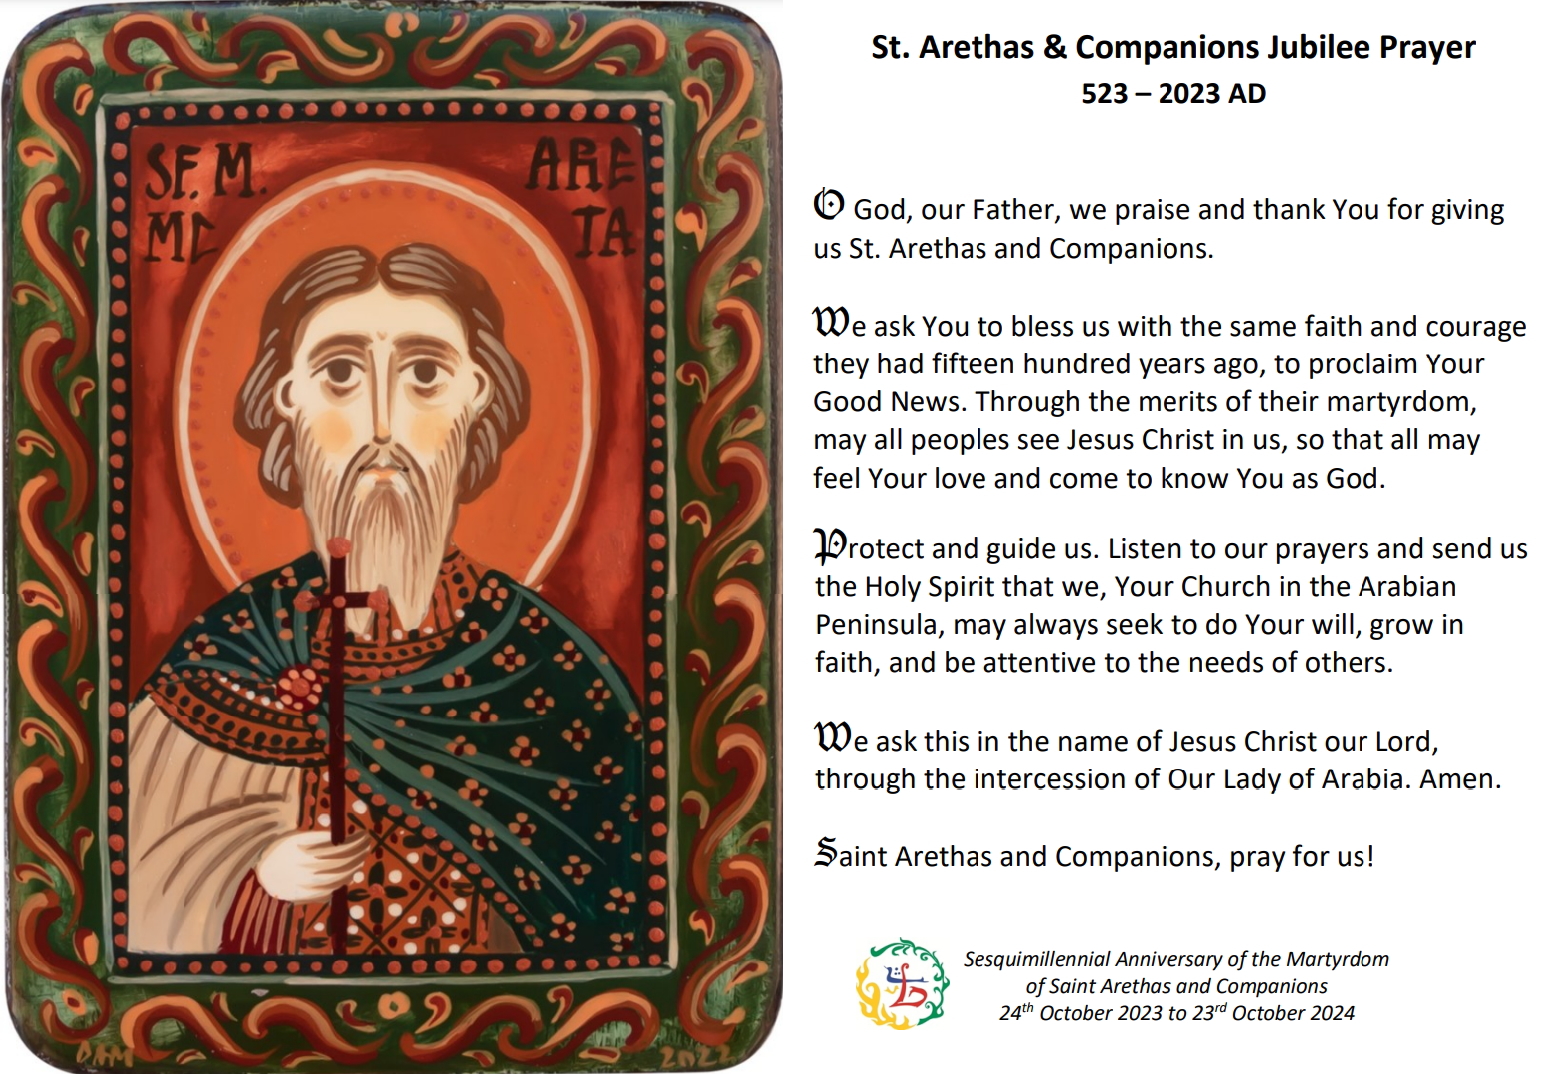 St. Arethas and Companions Jubilee Prayer